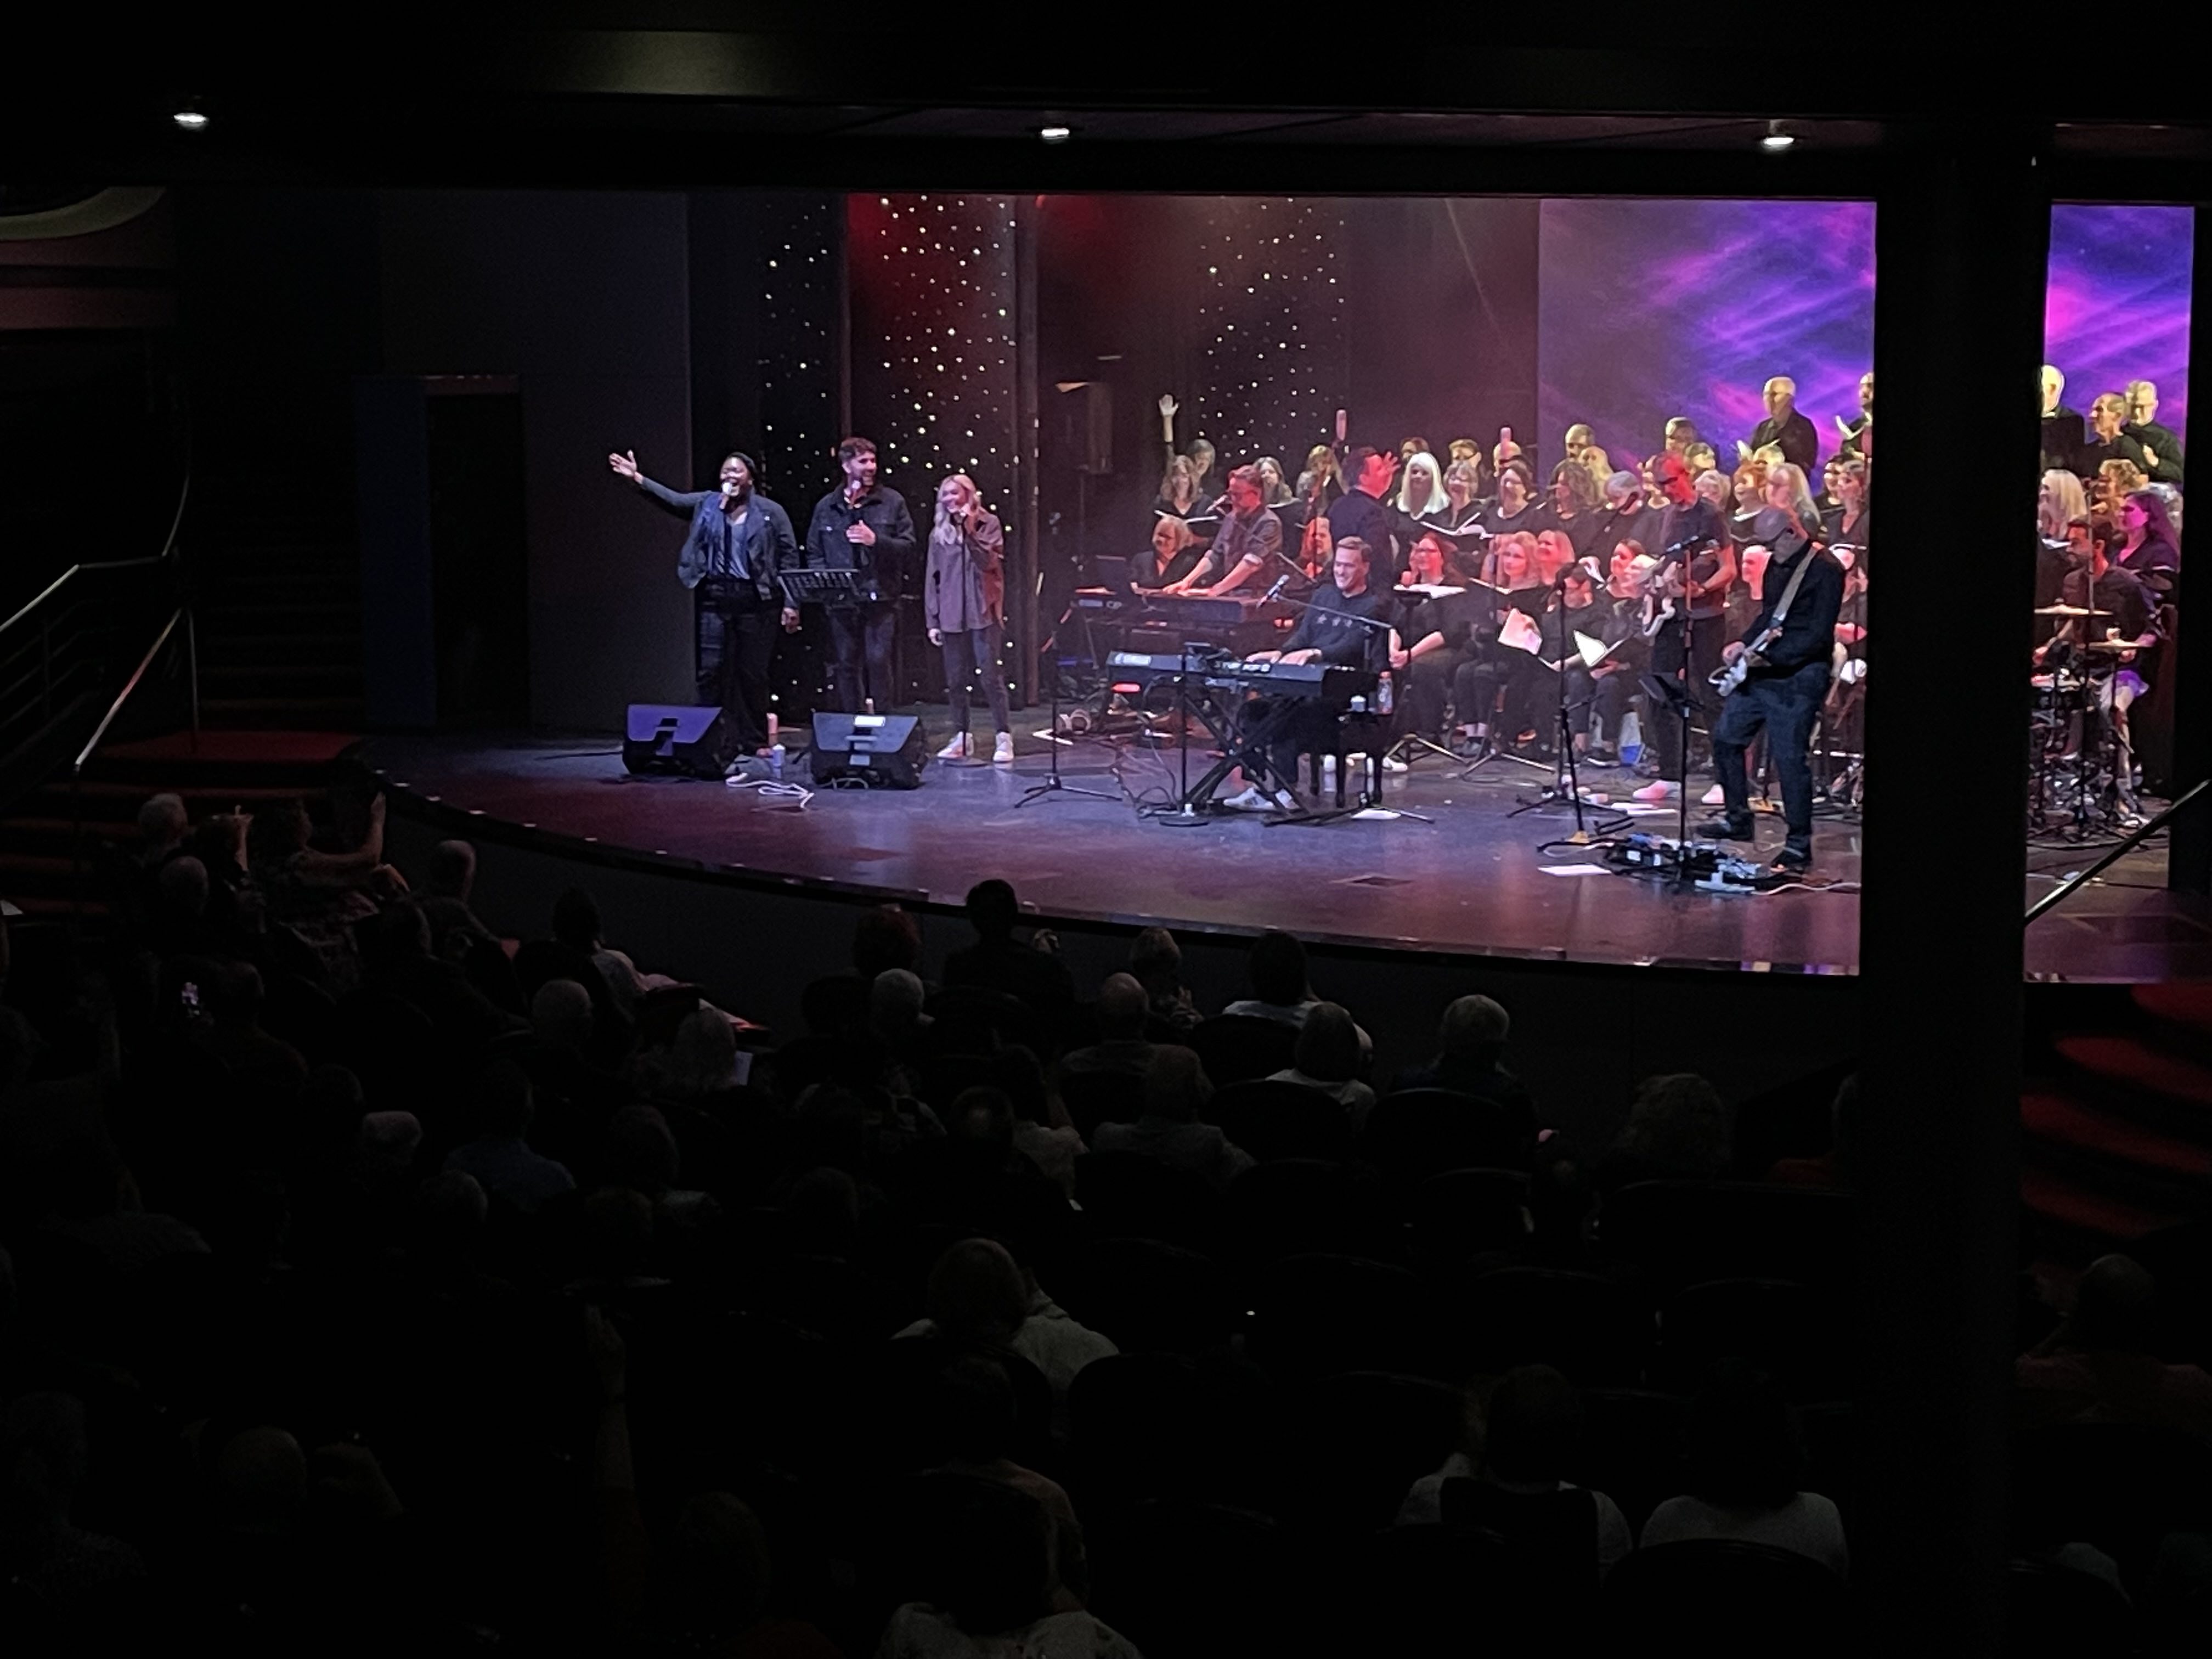 Michael W. Smith performing with the choir during his Alaska Cruise